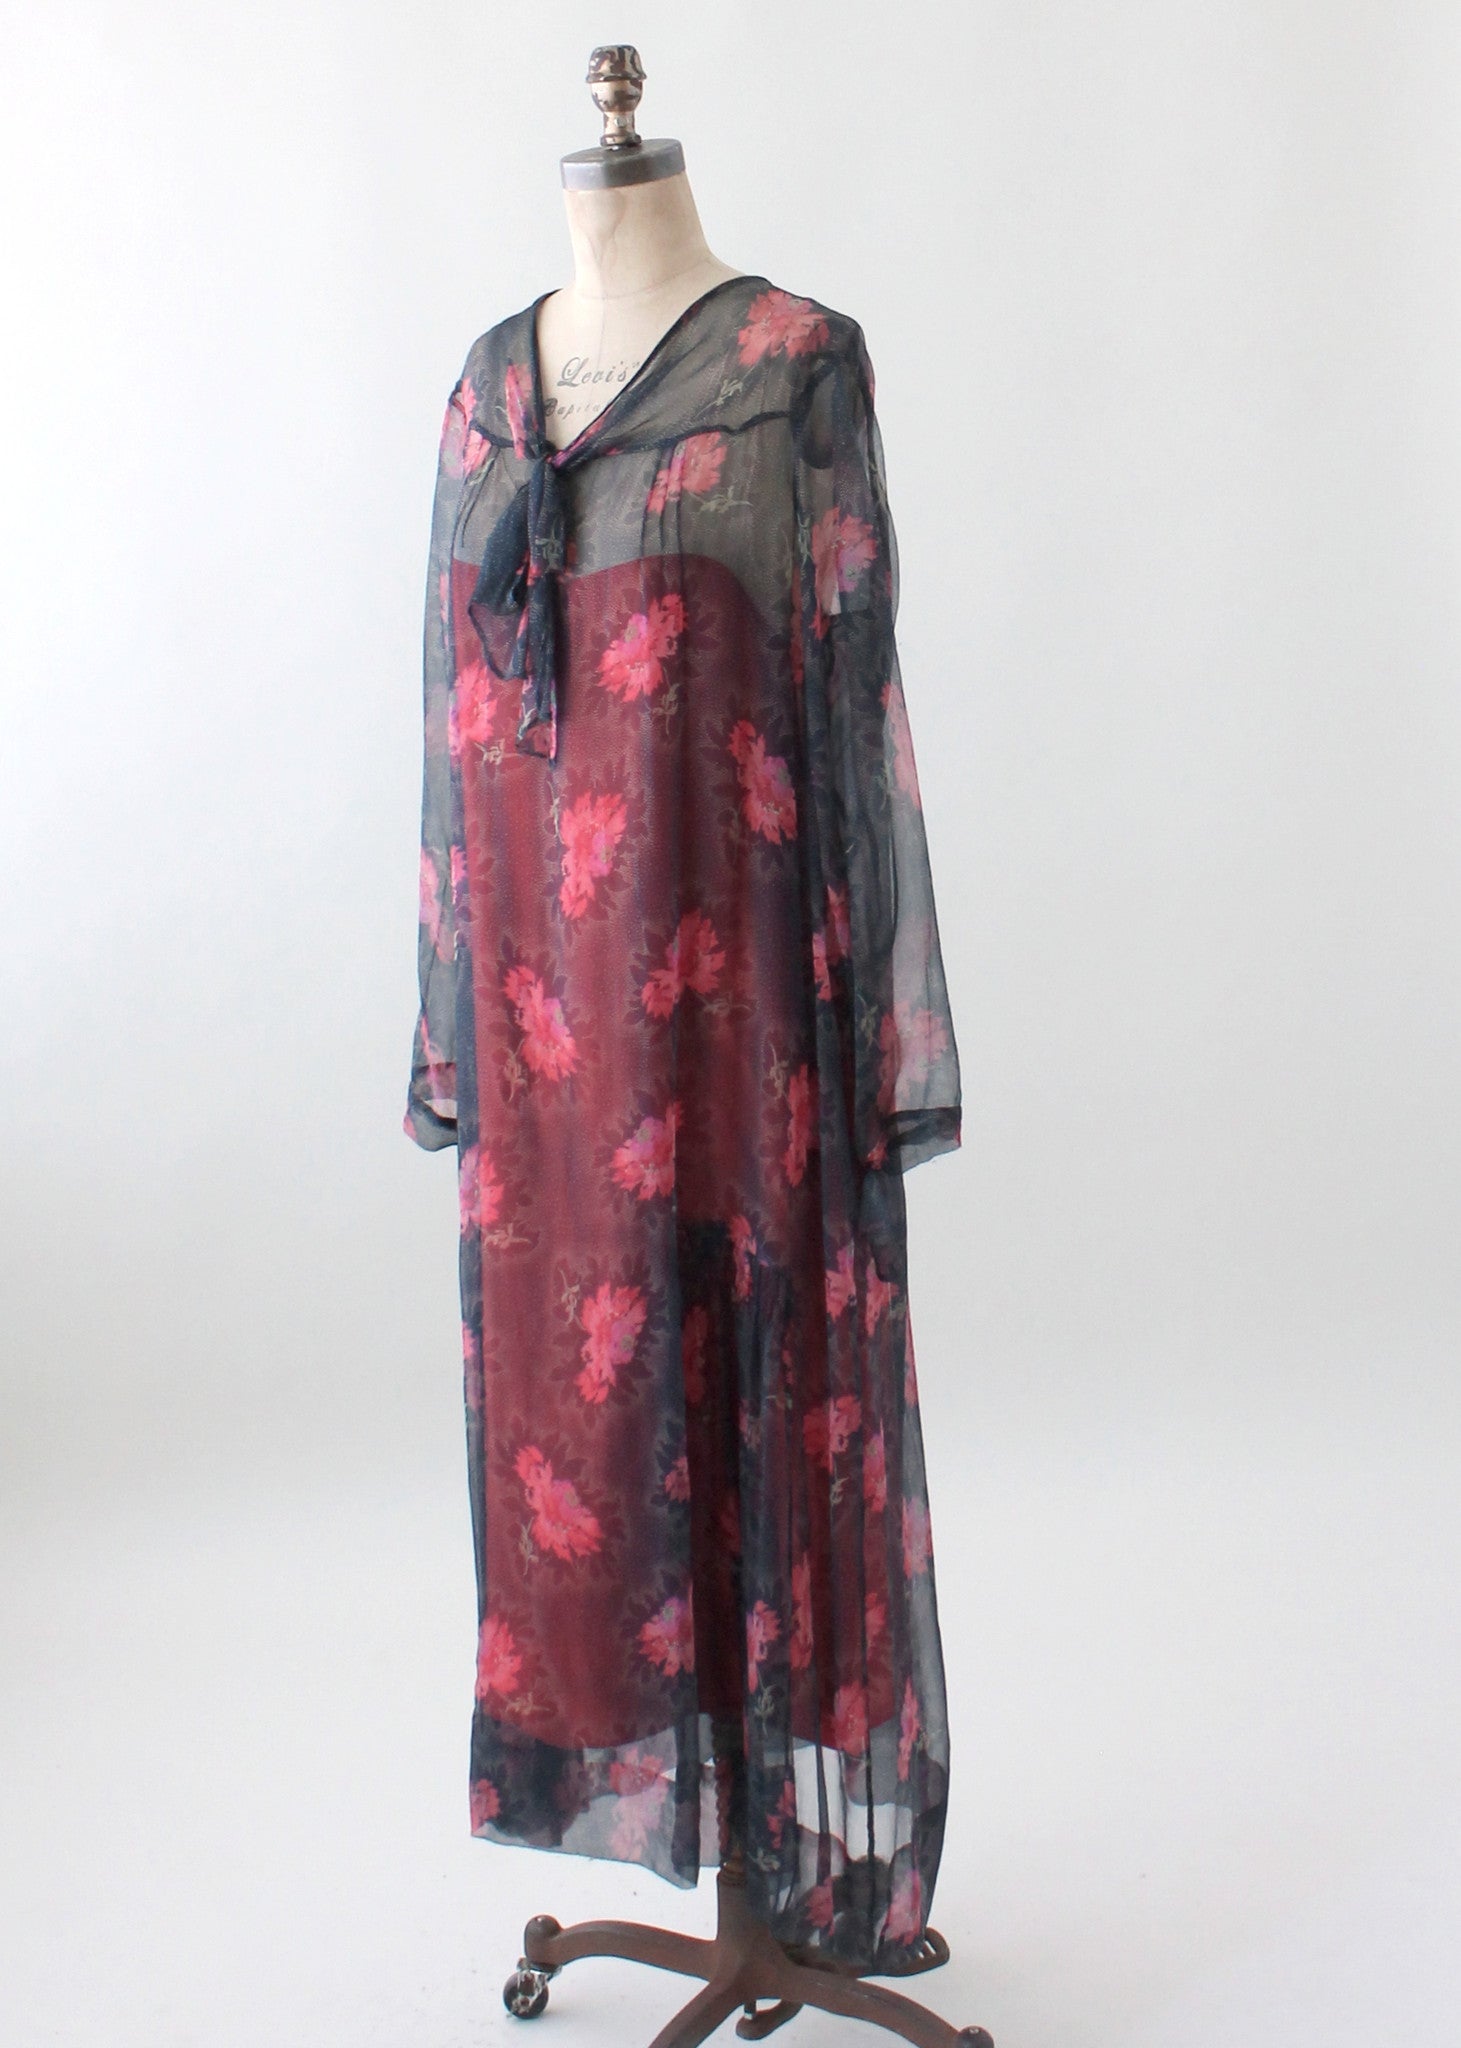 Vintage 1920s Navy and Pink Floral Silk Chiffon Dress - Raleigh Vintage